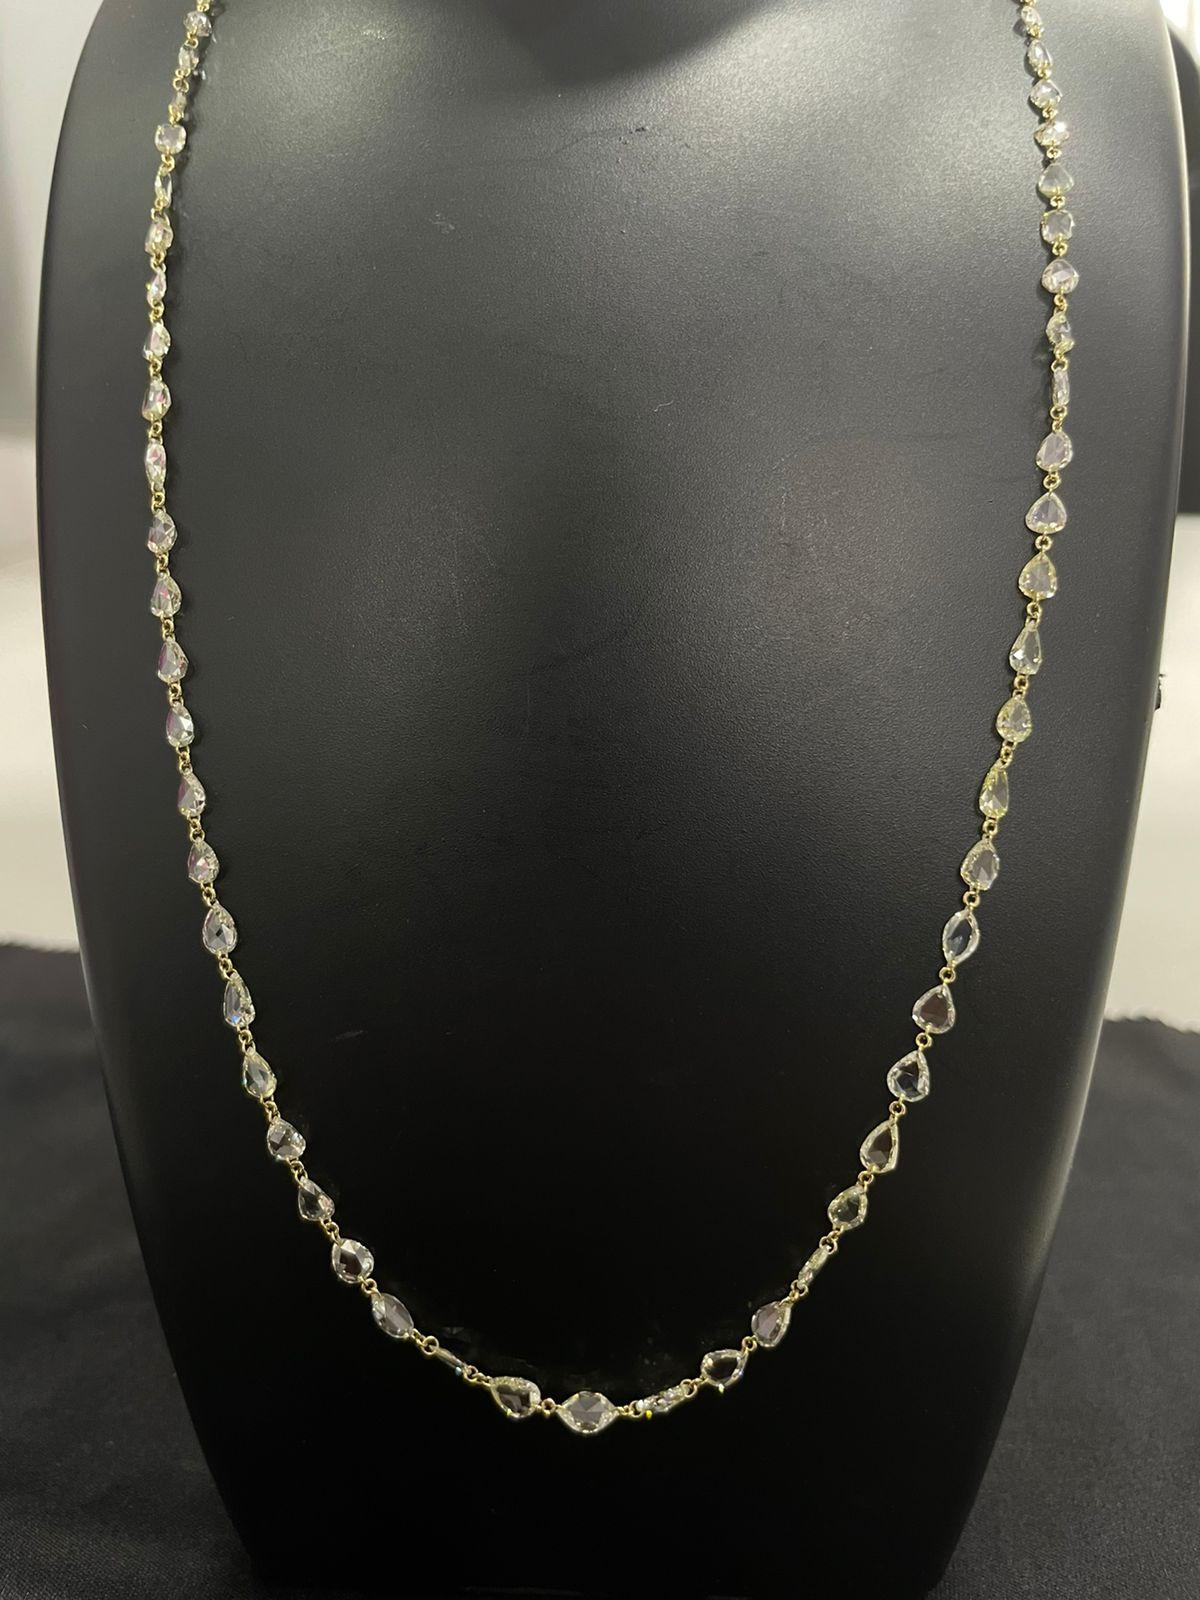 PANIM 11.43 Cts Fancy Rosecut Diamond Necklace in 18 Karat White Gold In New Condition For Sale In Tsim Sha Tsui, Hong Kong